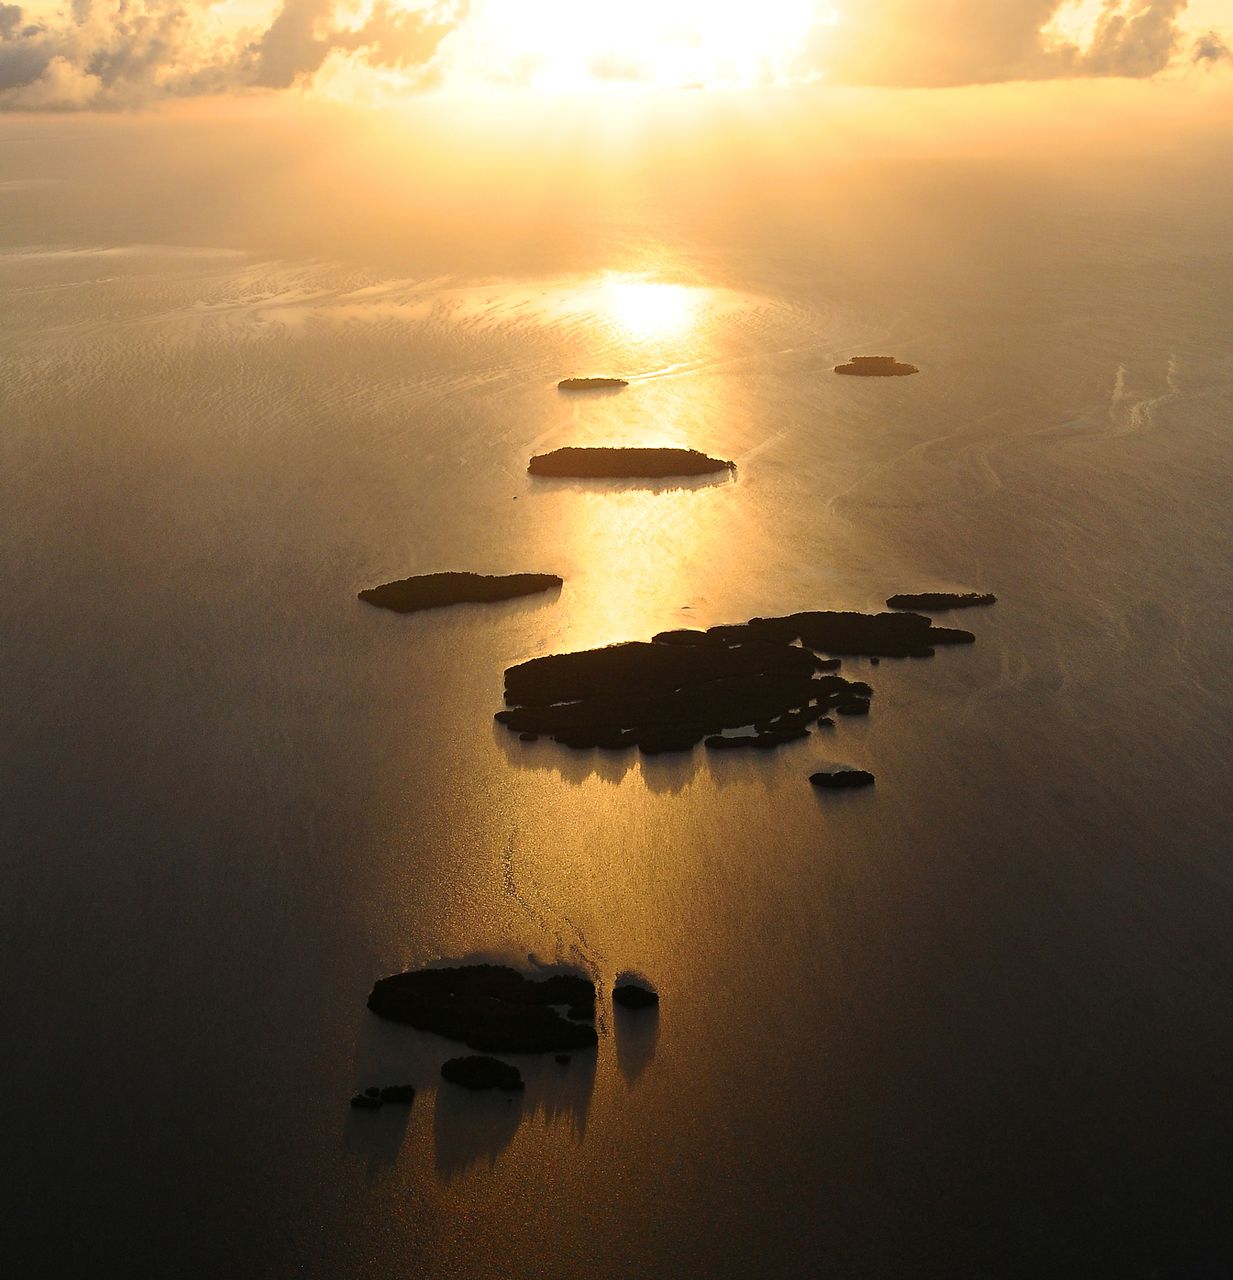 An aerial view off Key West, Fla., shows uninhabited islands of the Lower Florida Keys at sunset. The Lower Keys are renowned for their eco-attractions and pristine natural environment. (Rob O'Neal/Florida Keys News Bureau)